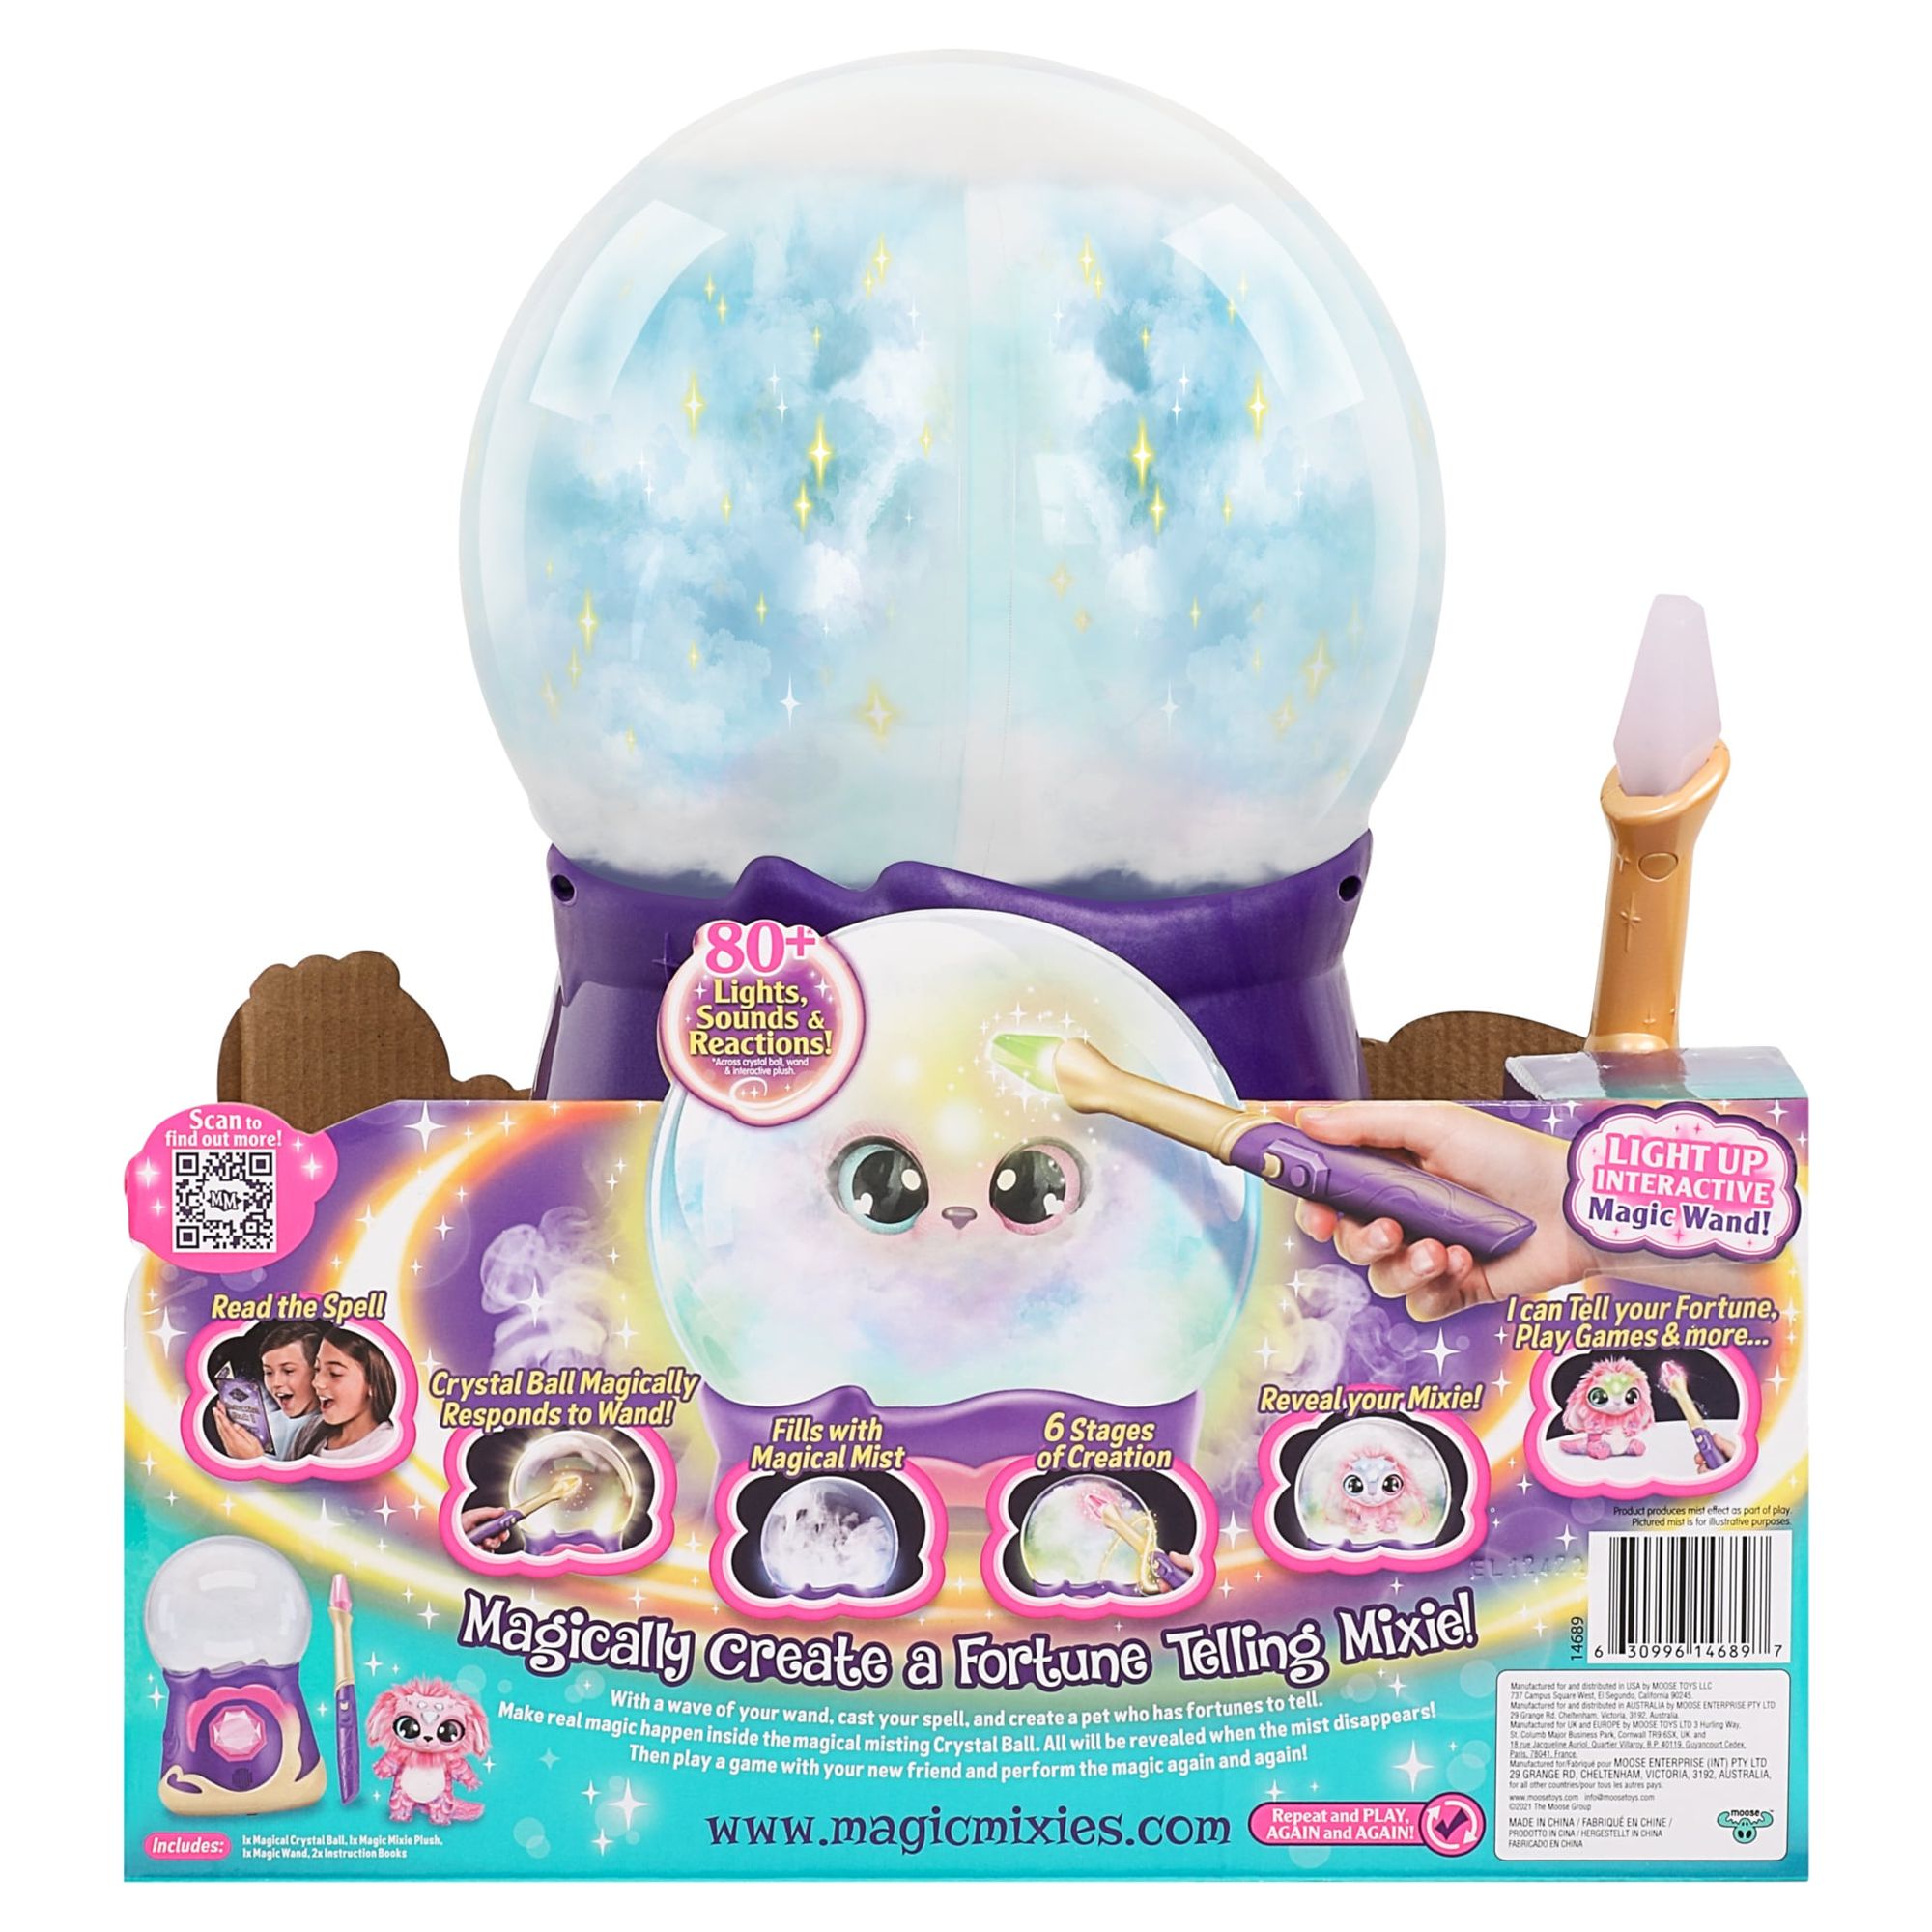 Magic Mixies Magical Misting Crystal Ball with Interactive 8 inch Pink Plush Toy Ages 5+ - image 16 of 18